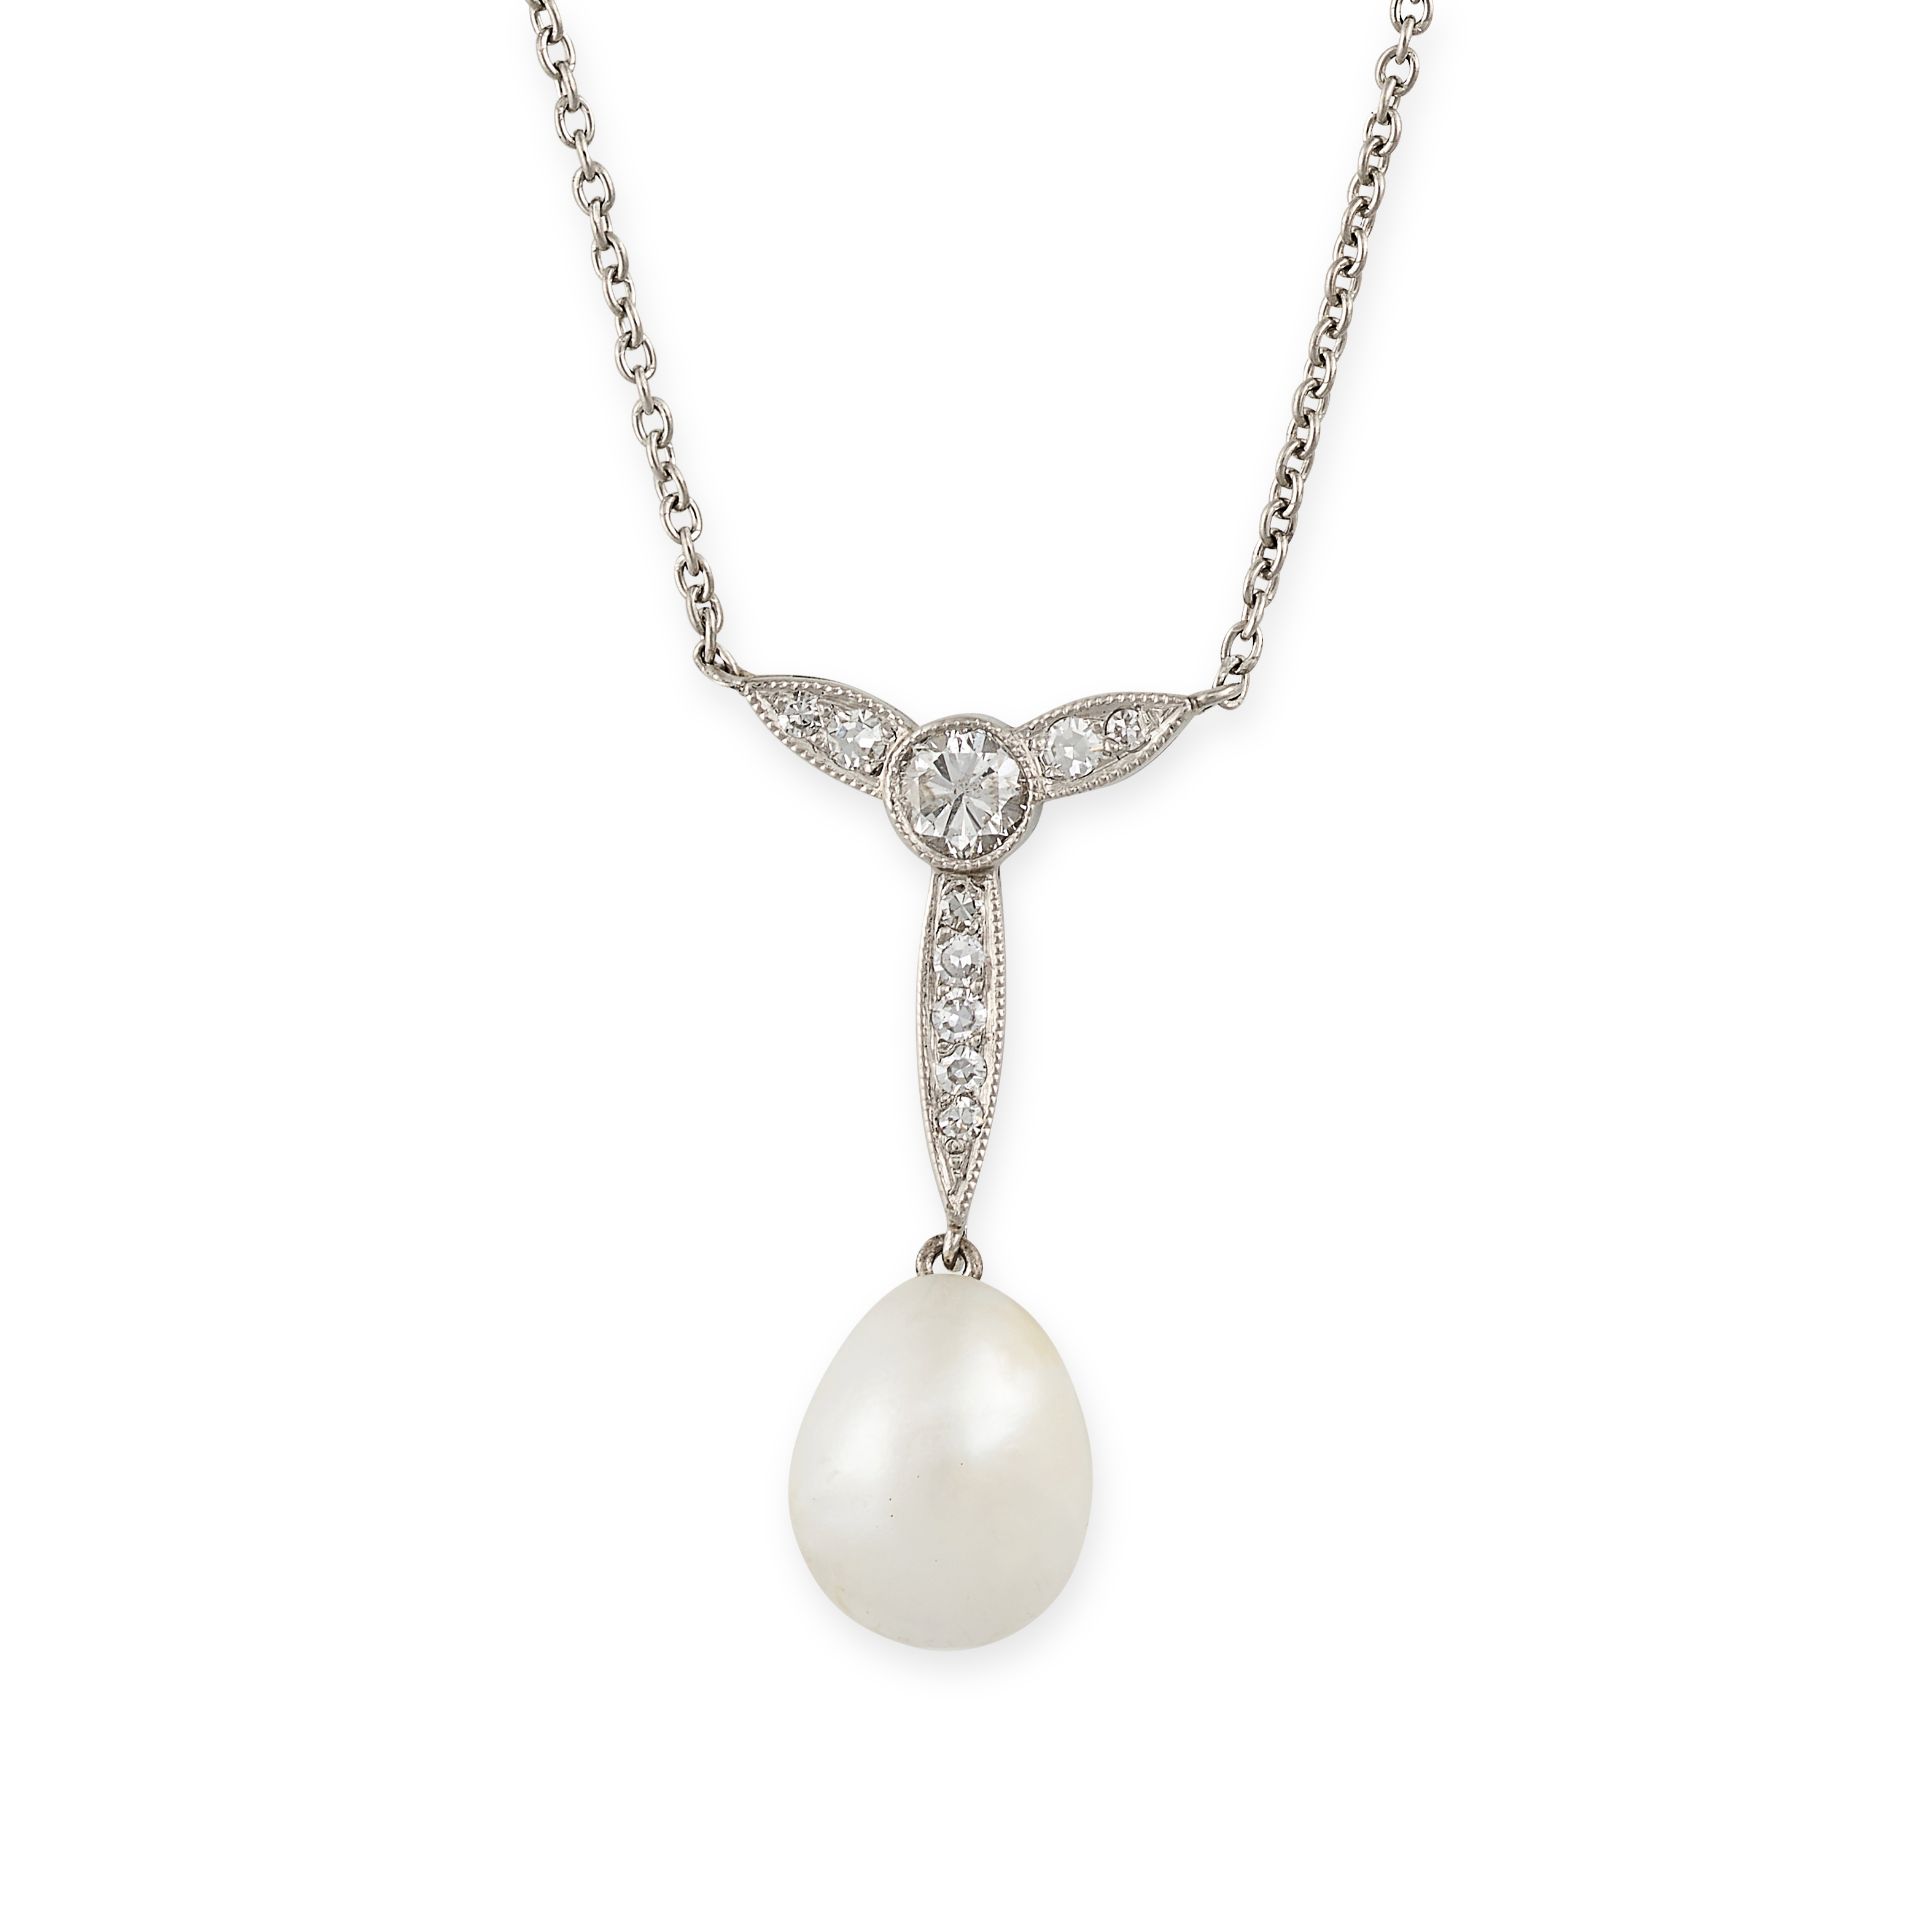 A PEARL AND DIAMOND NECKLACE set with brilliant cut diamonds and a pearl drop of 9.5mm, stamped